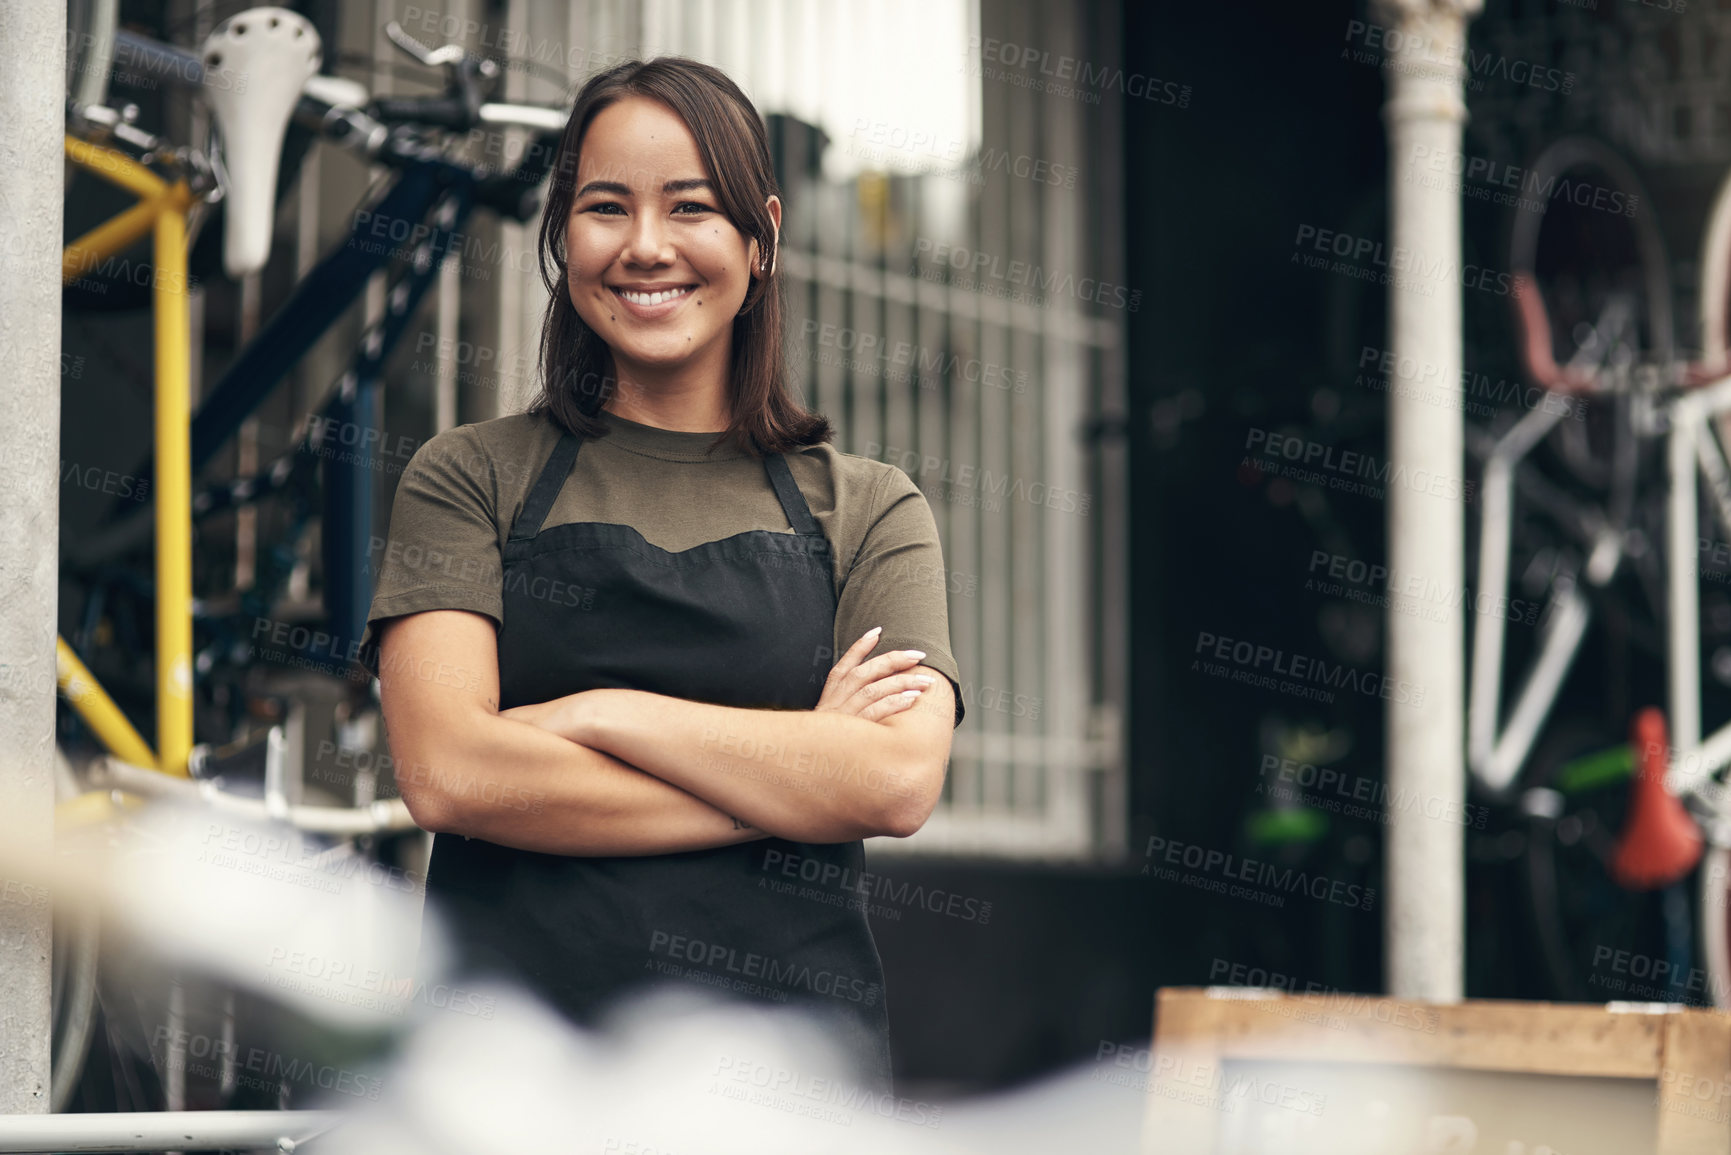 Buy stock photo Shot of an attractive young woman standing outside her bicycle shop with her arms folded